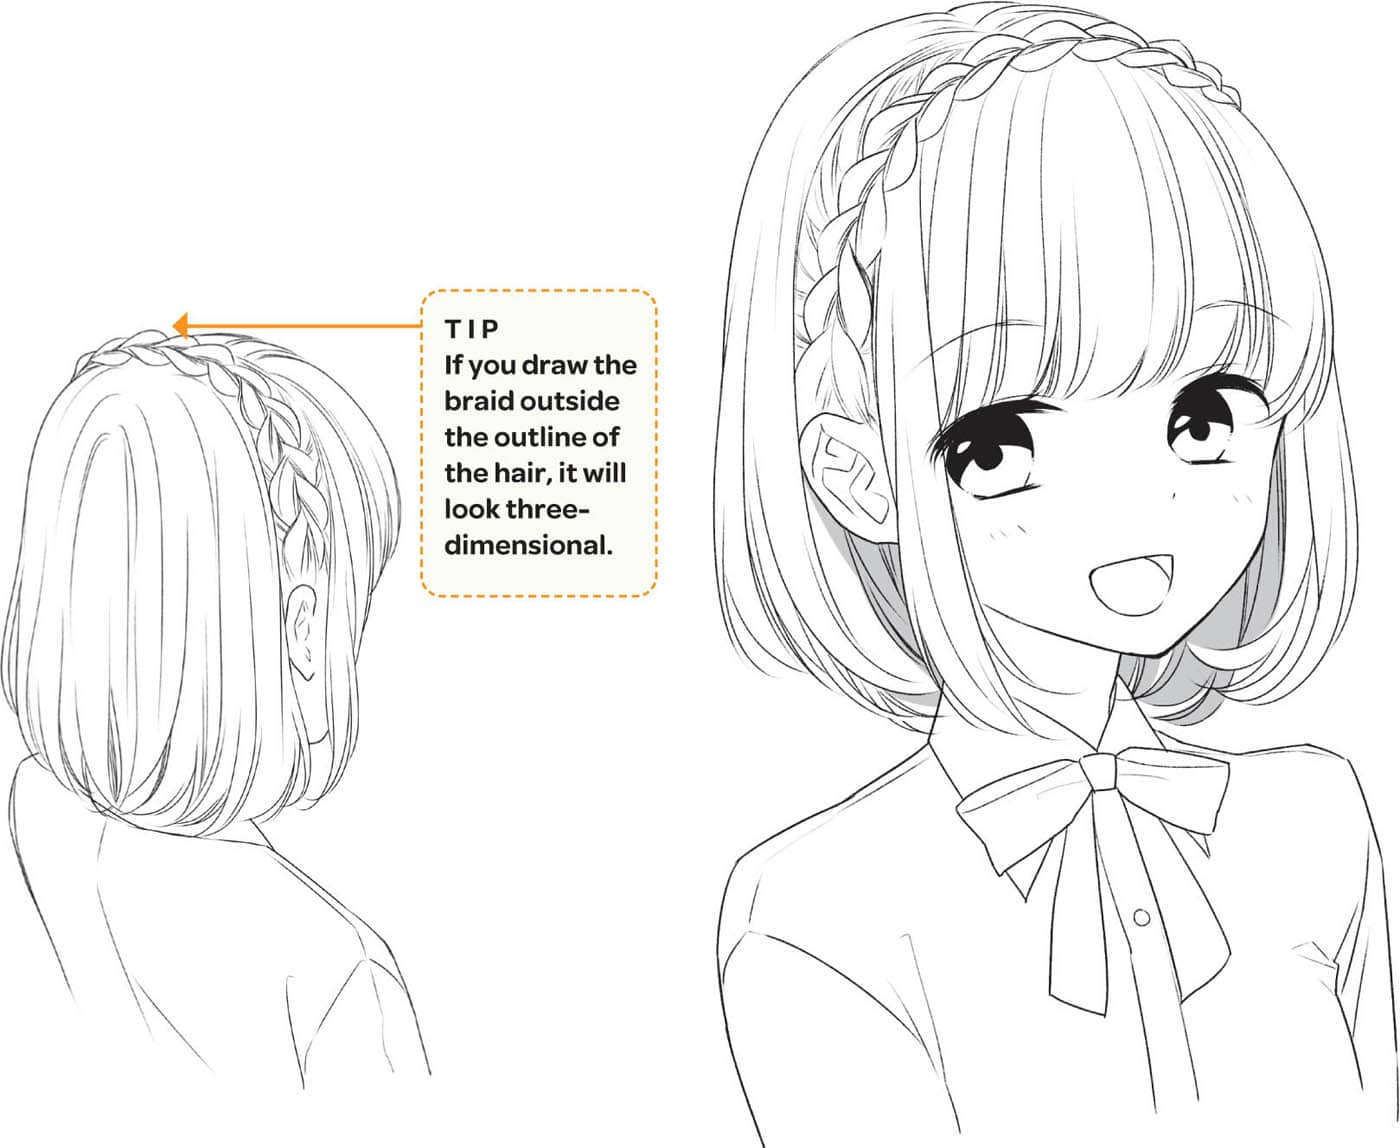 TIP If you draw the braid outside the outline of the hair, it will look three-dimensional.